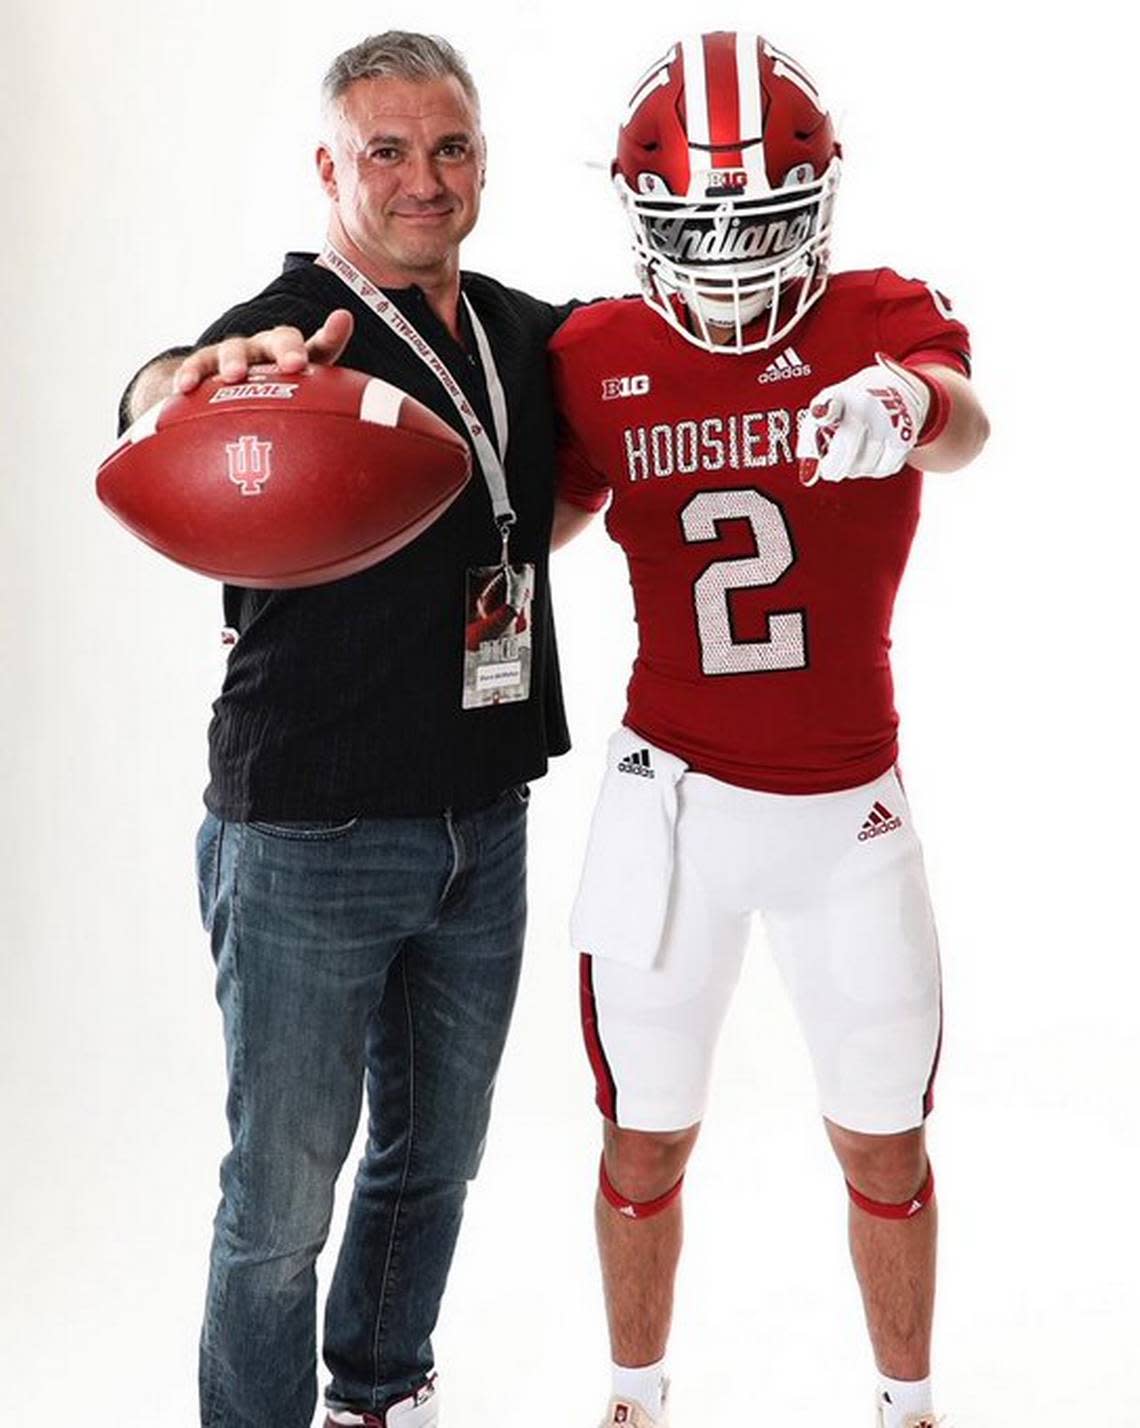 Declan McMahon of the D1 Indiana University football team with his dad, Shane McMahon, of WWE fame.